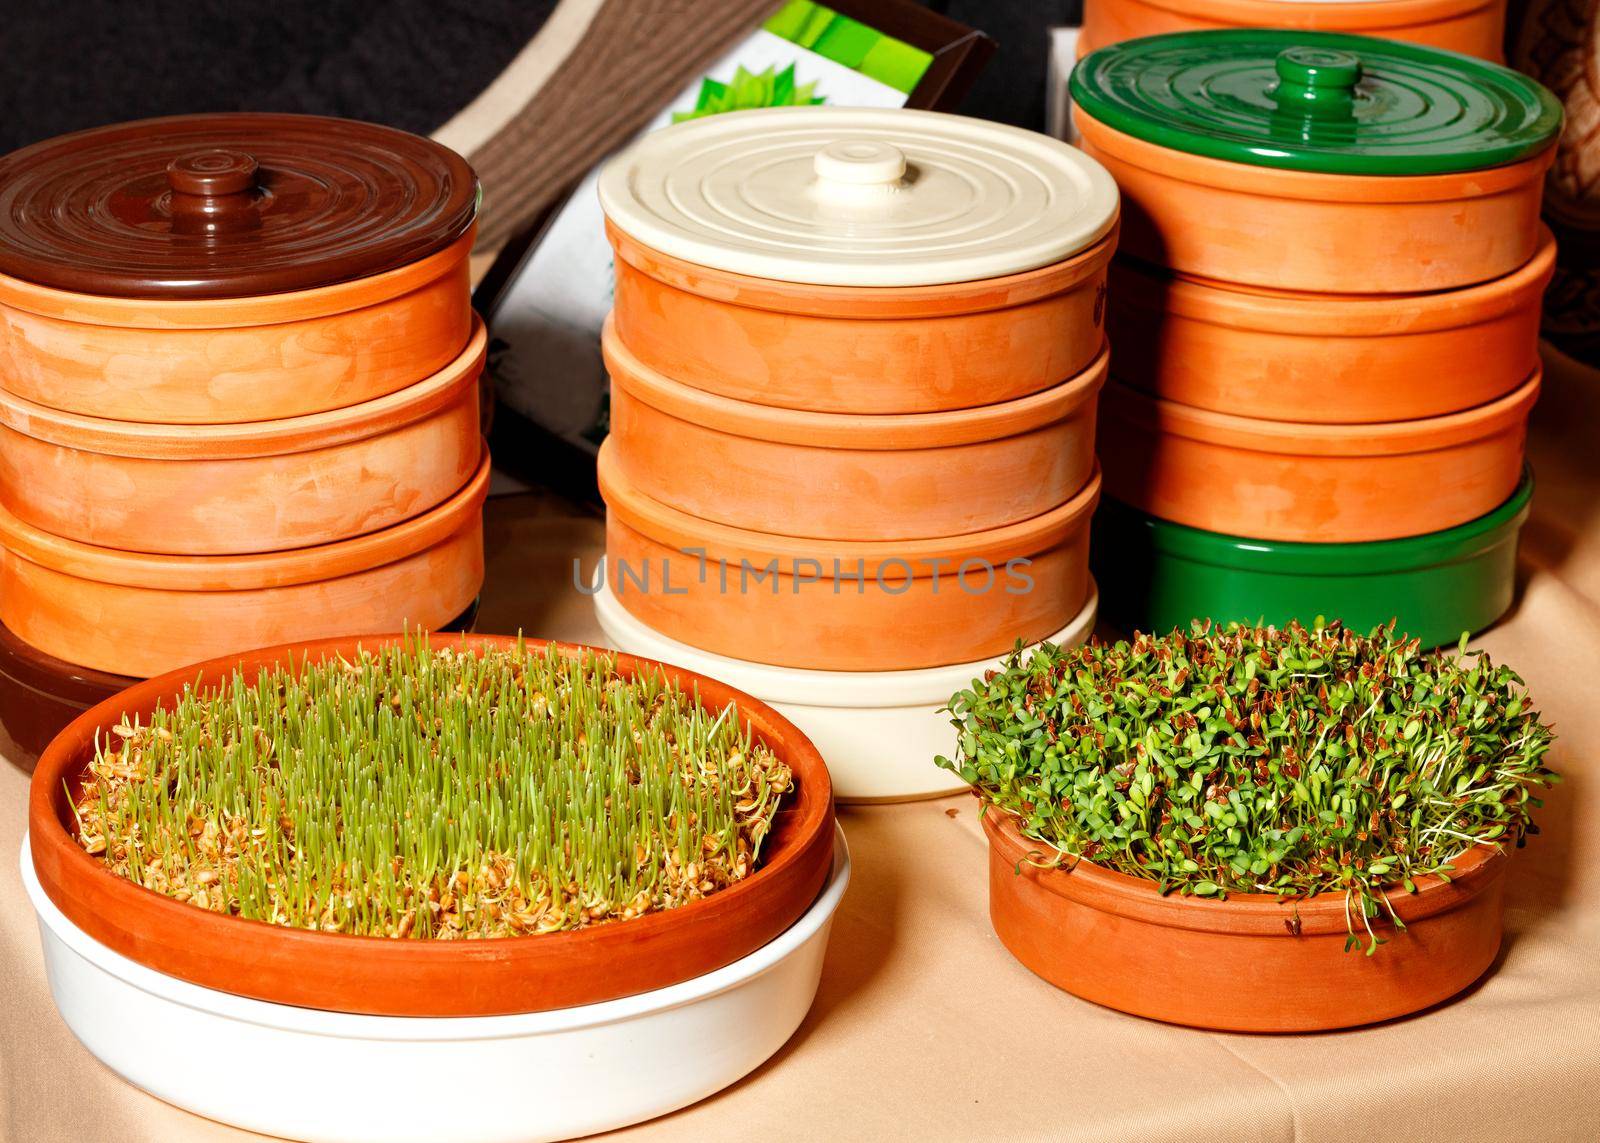 Sprouted grains of wheat and legumes, growing microgreens in special clay containers for healthy food. by Sergii